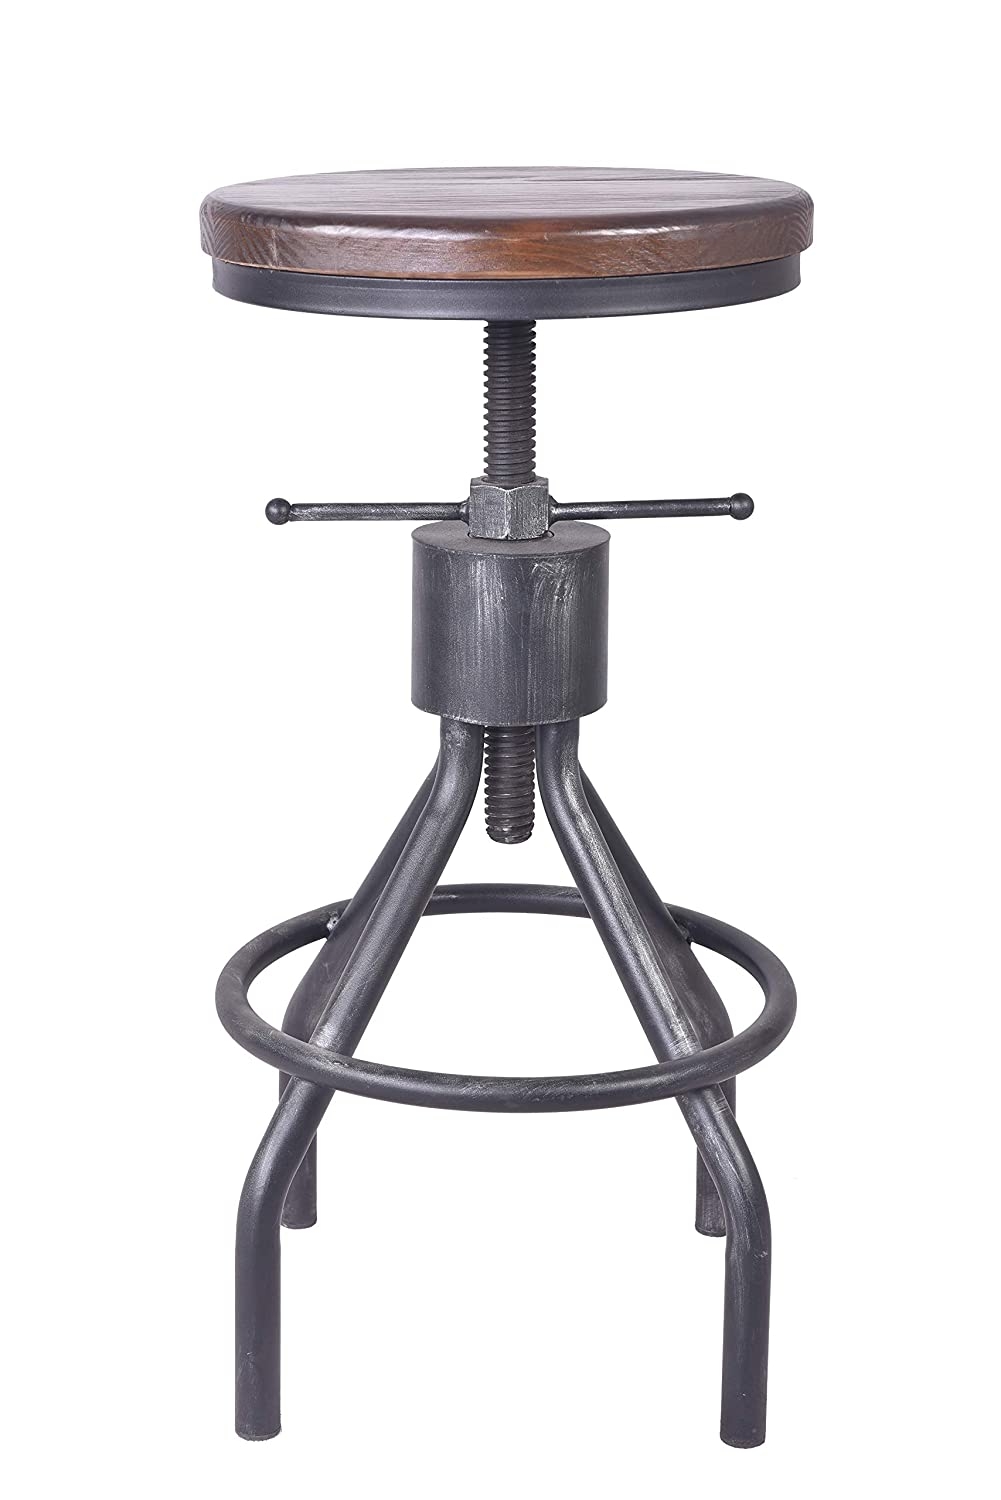 Topower Vintage Industrial Bar Stools,Cast Iron Tractor Stool,Adjustable Height,Swivel Seat Breakfast Chair Copper